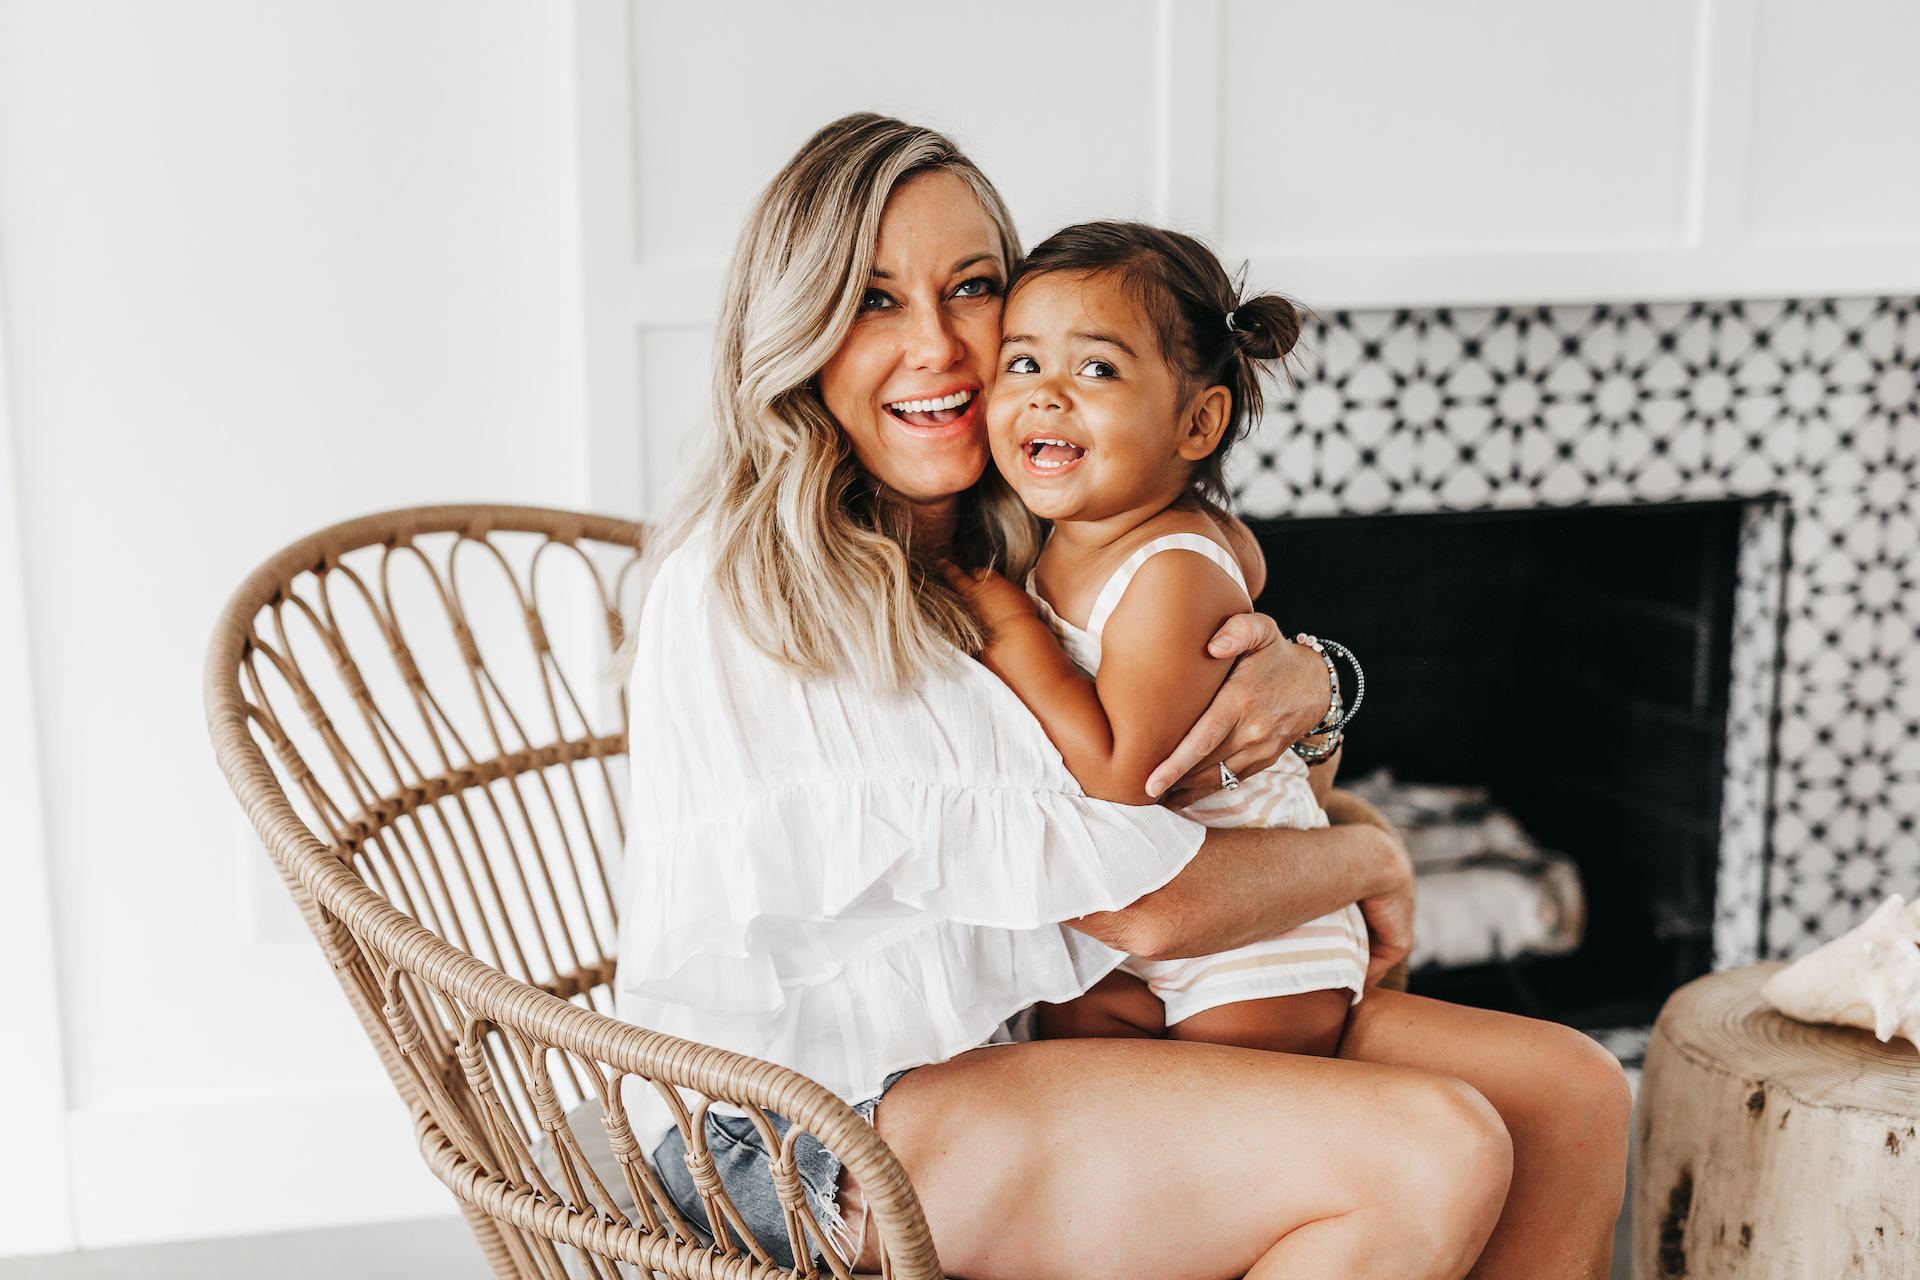 If you are coping with infertility and/or egg donation, this blog is for you. Mother via donor eggs shares her experience coming to terms with using an egg donor. Check it out!